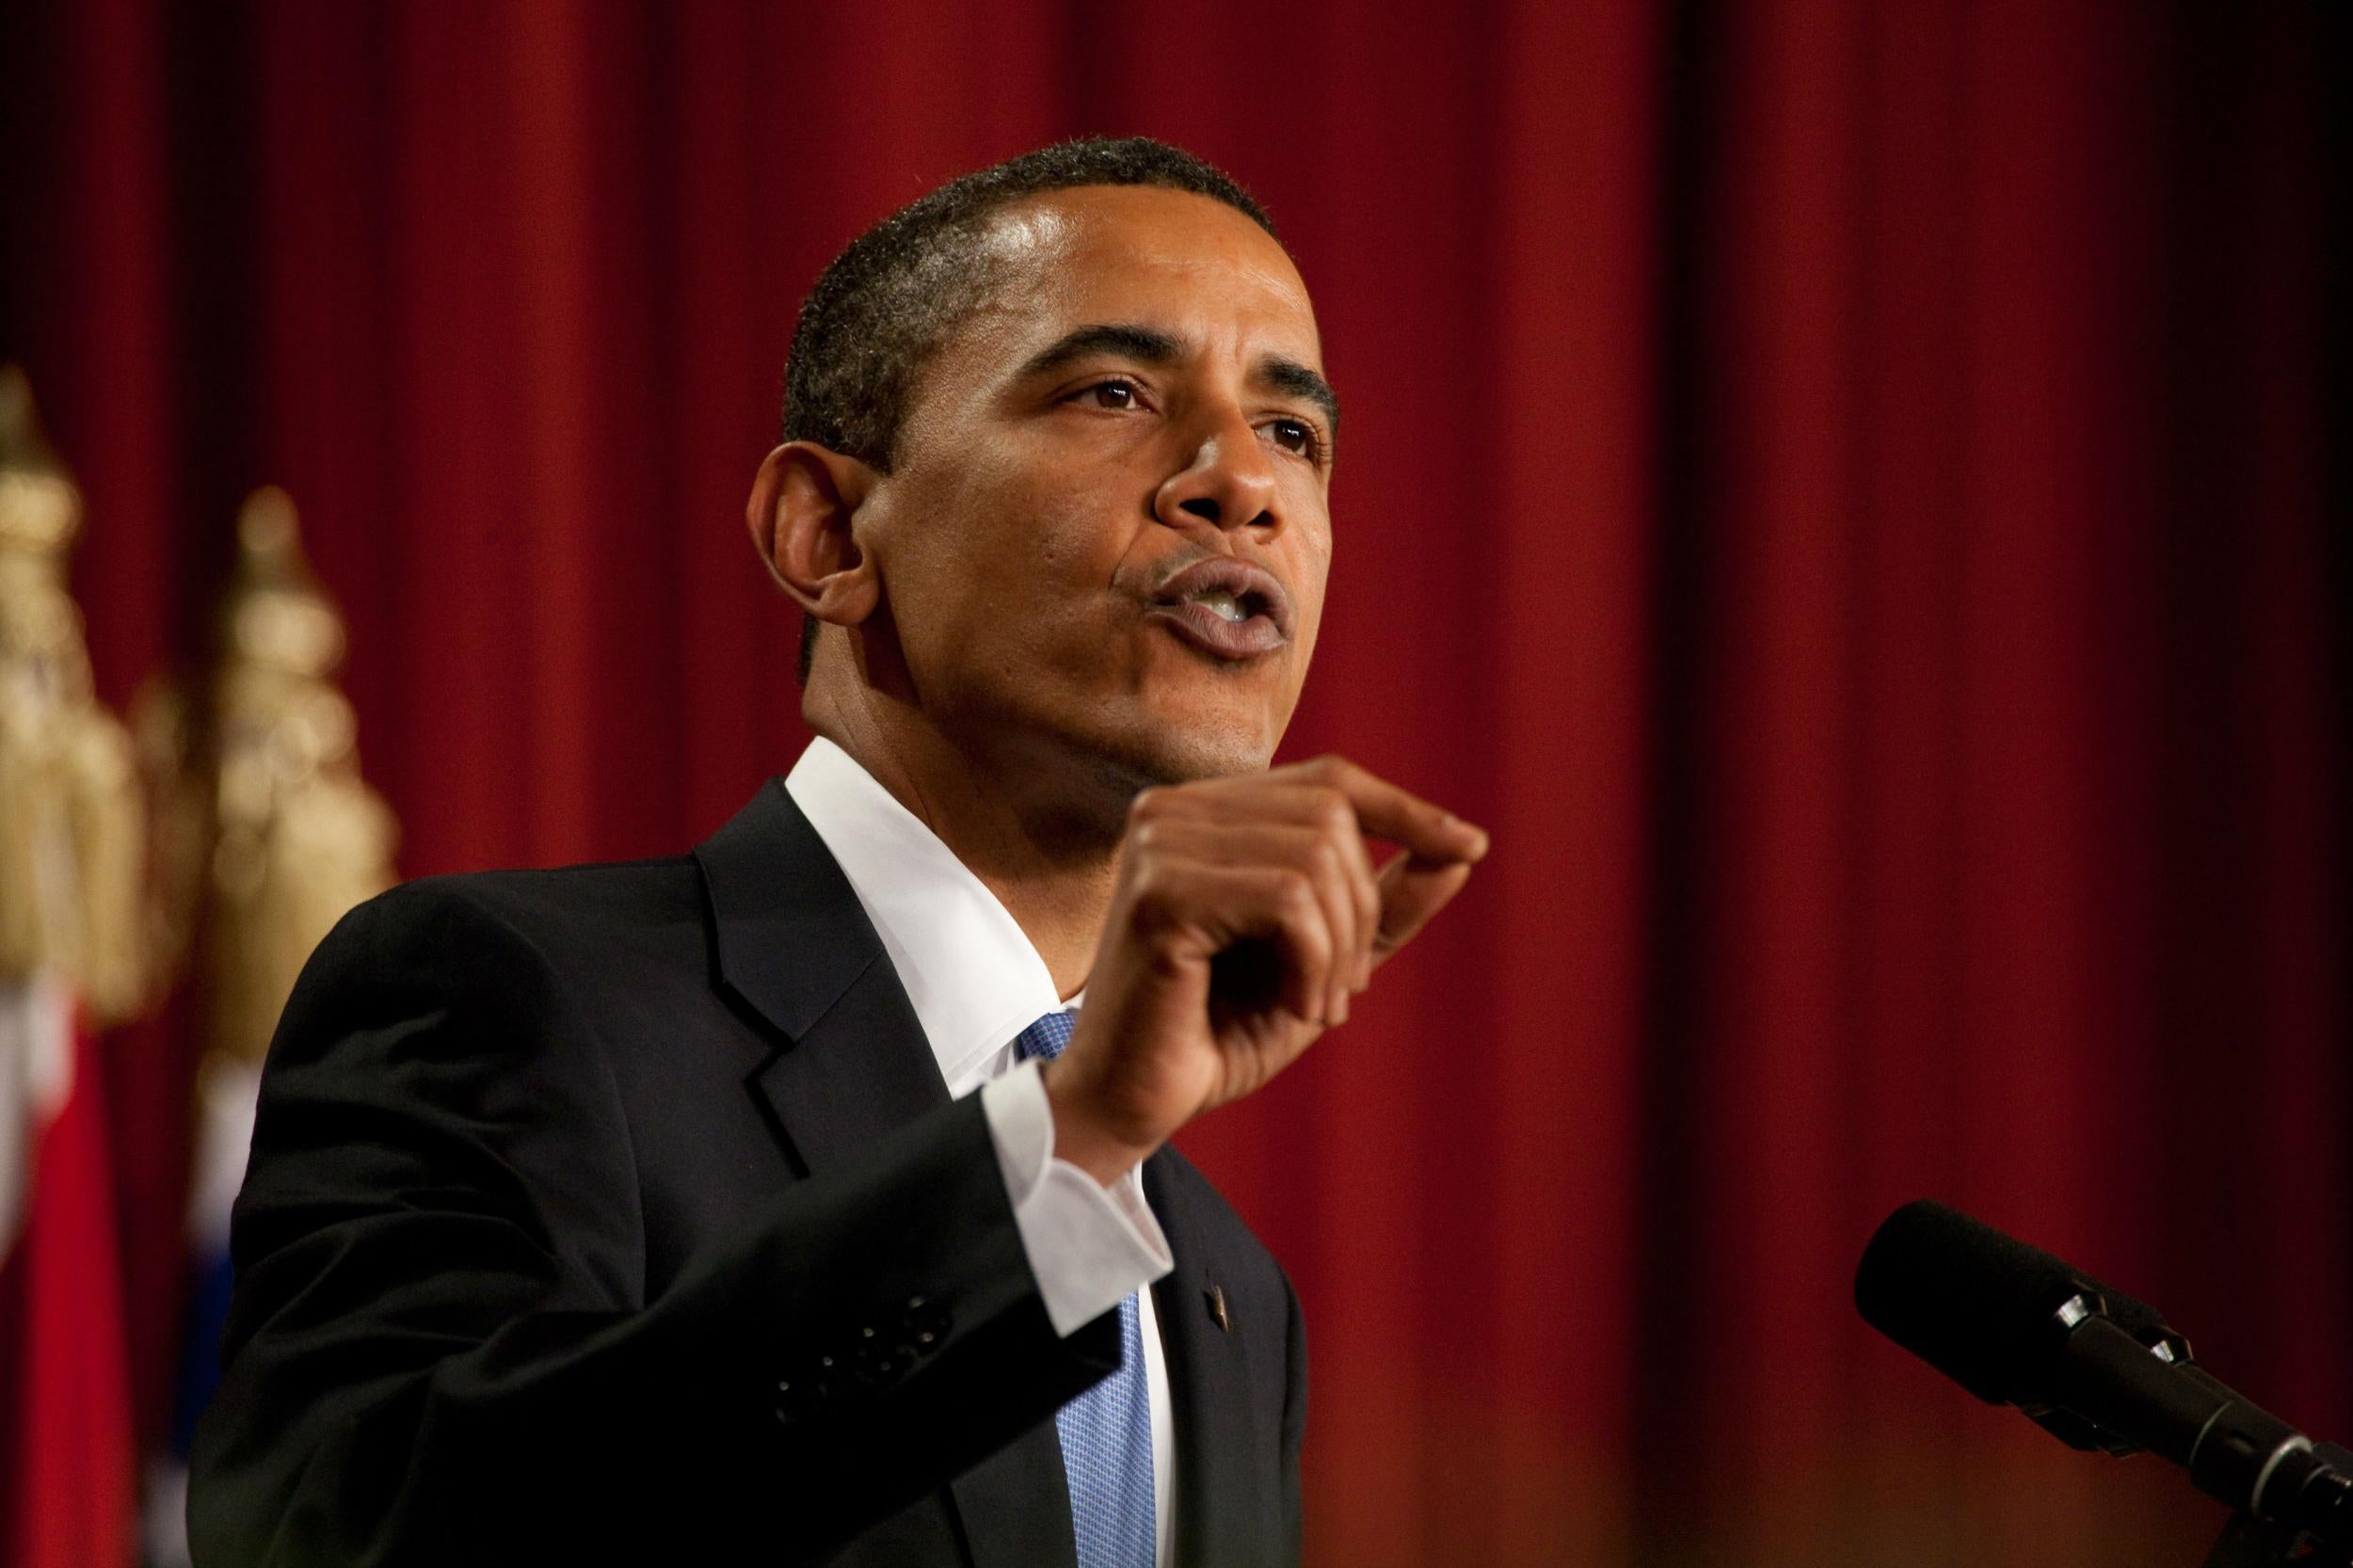 Watch Barack Obama's 2009 Cairo speech on relations with the ... - The Independent